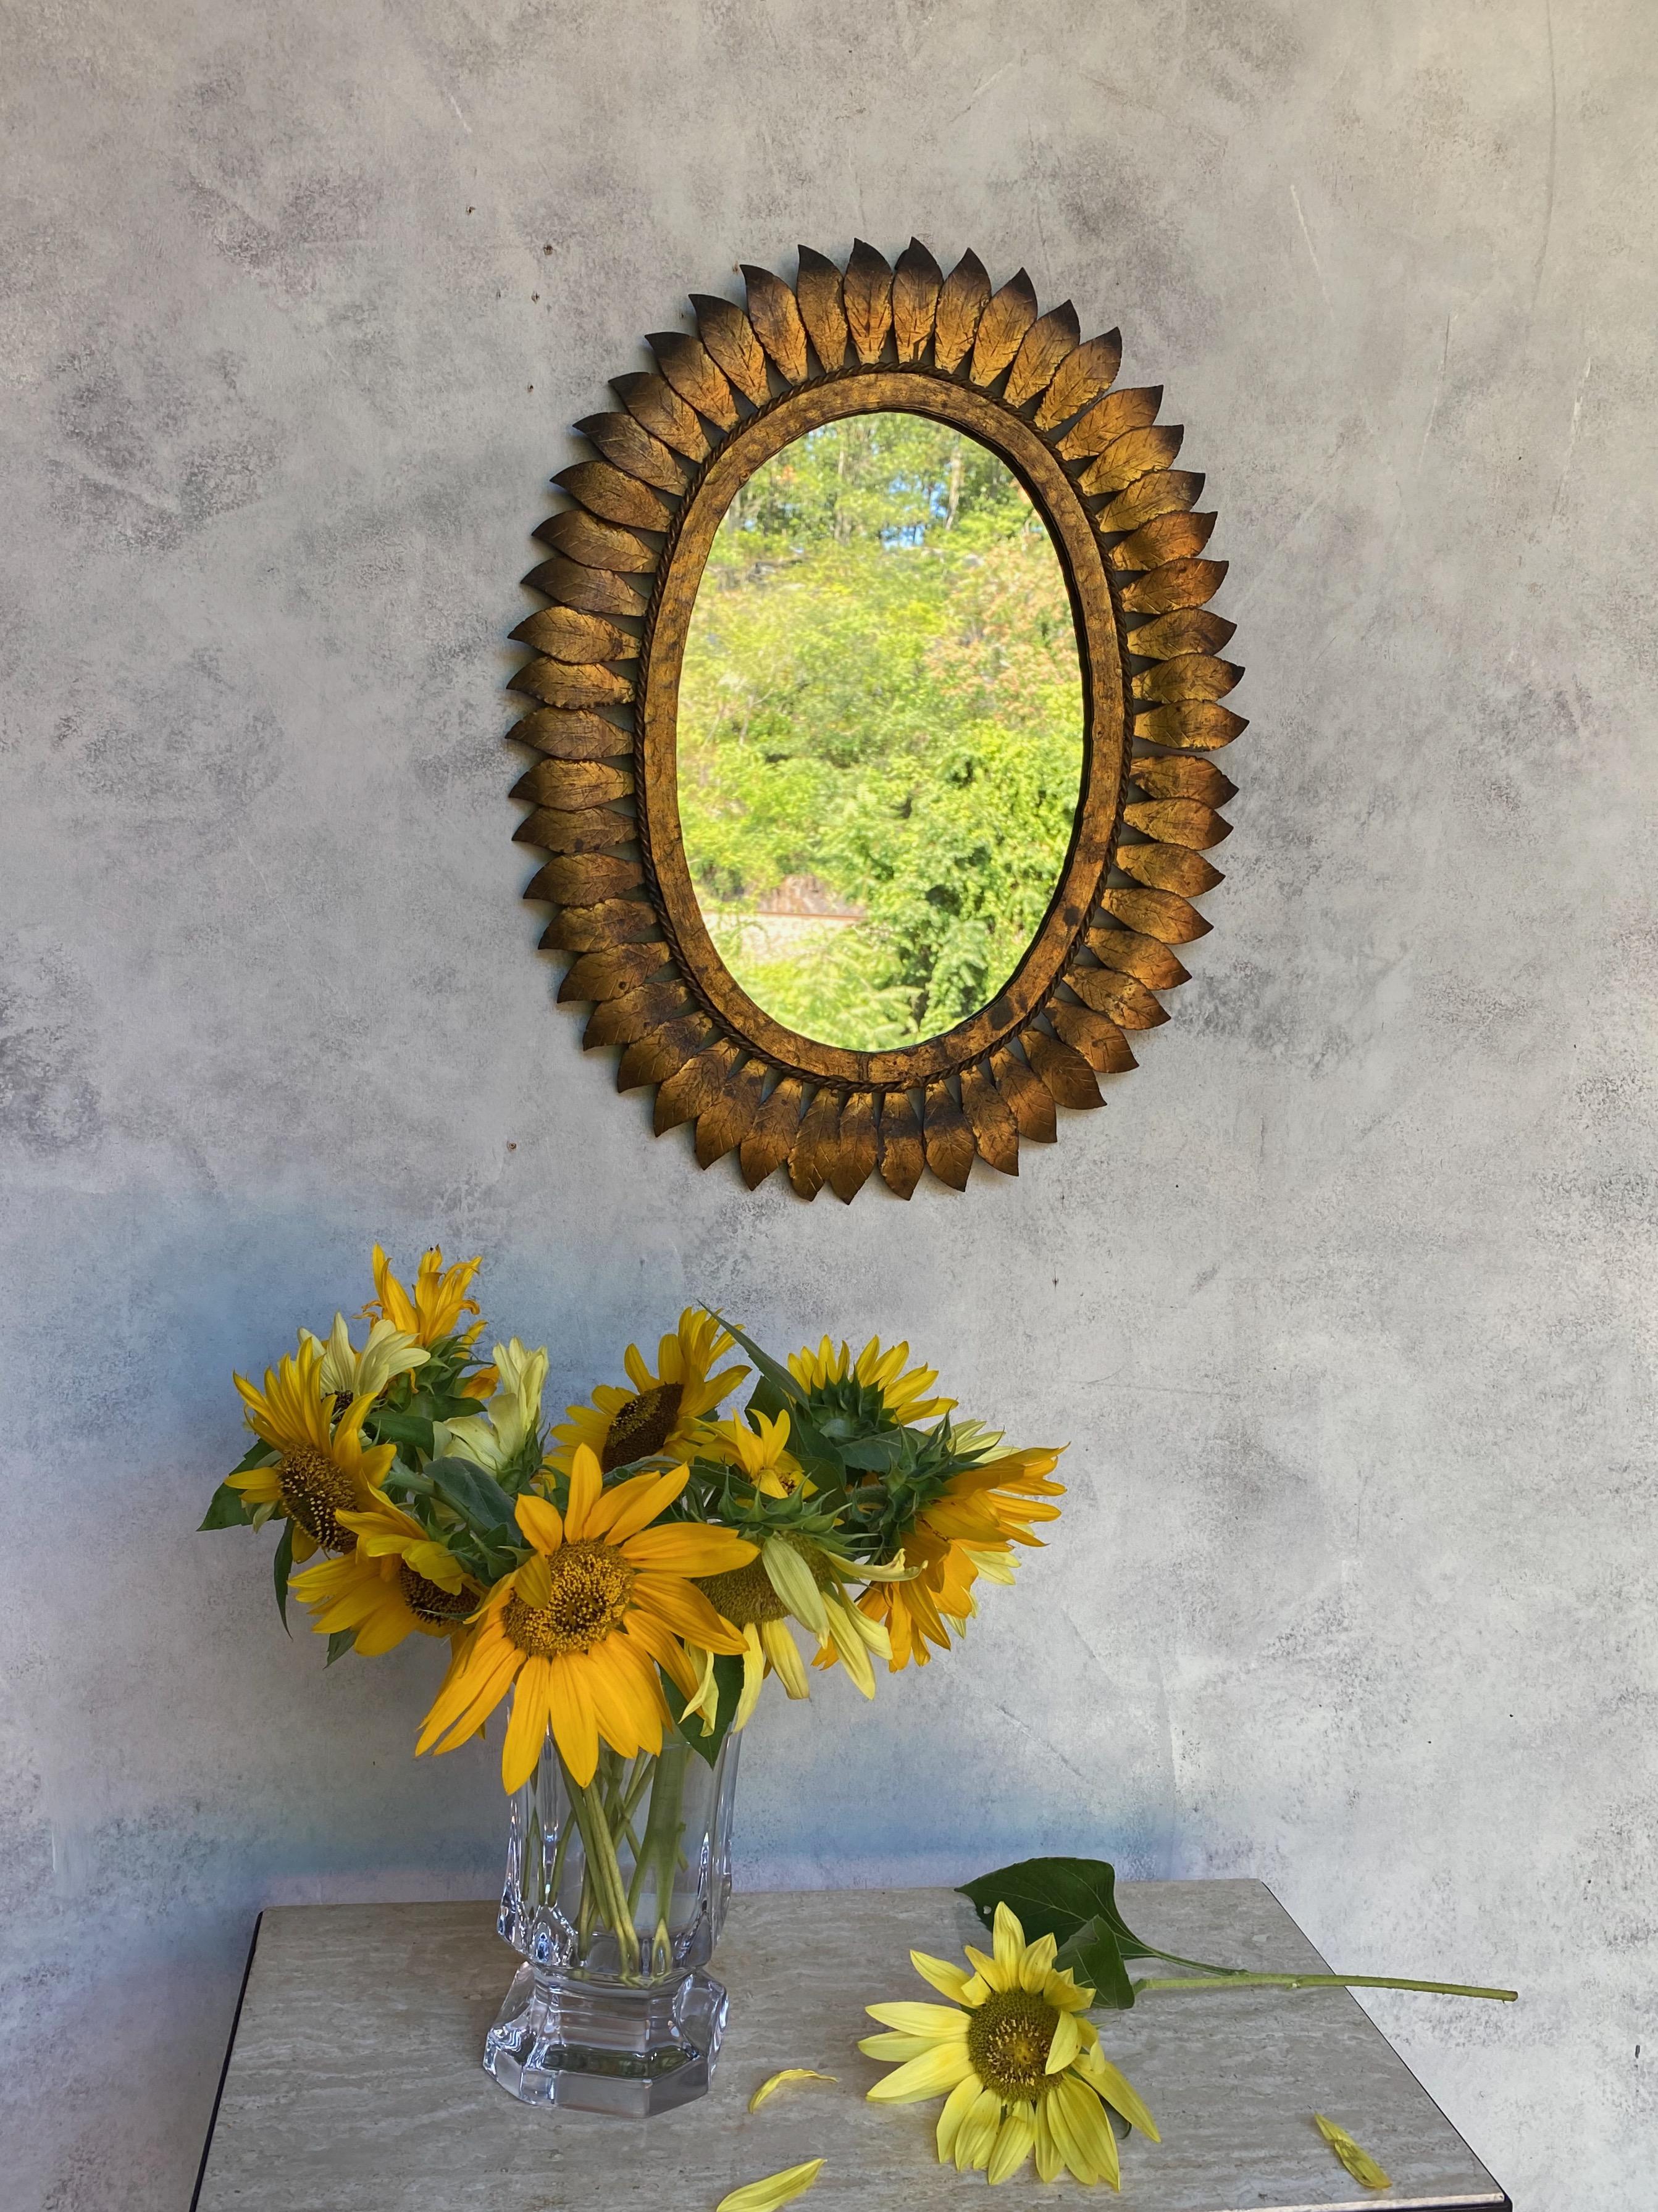 Spanish 1950s oval sunburst mirror in gilt iron and metal frame. Thin overlapping leaves are attached to a braided rope decorative border surrounding a hammered gilt frame. We recently added a felt backing to the mirror to give it more protection